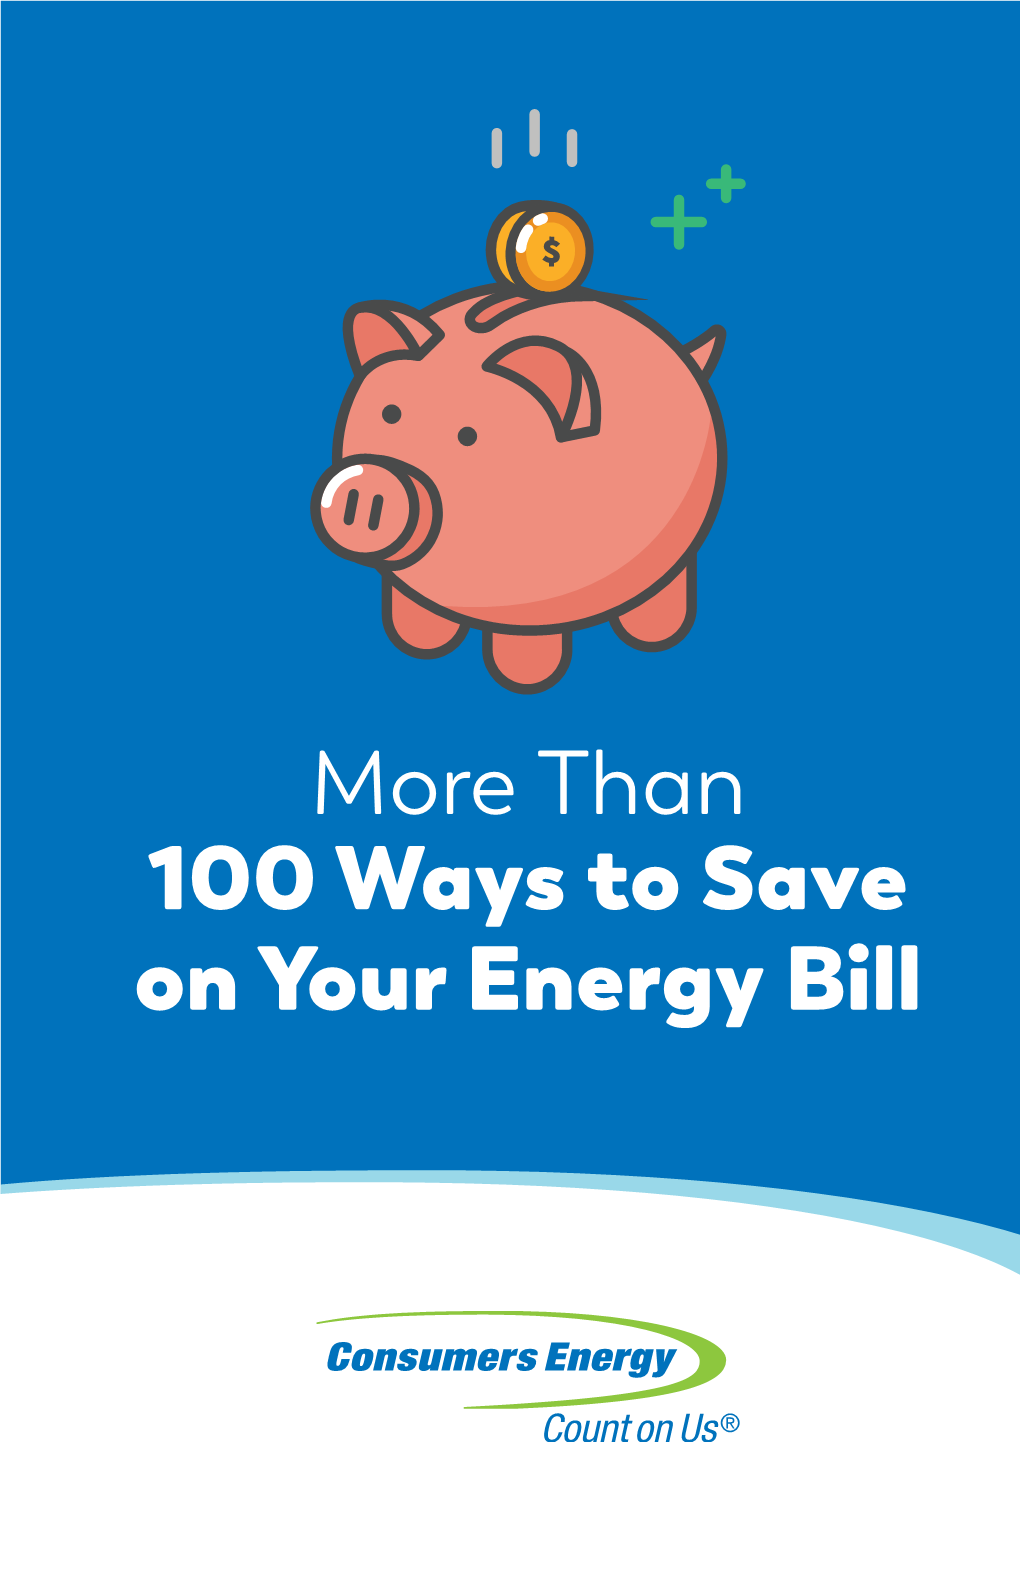 More Than 100 Ways to Save on Your Energy Bill Home Heating Save Money Heating Your Home Is the Largest Use of Energy and Offers the Greatest Opportunity for Savings